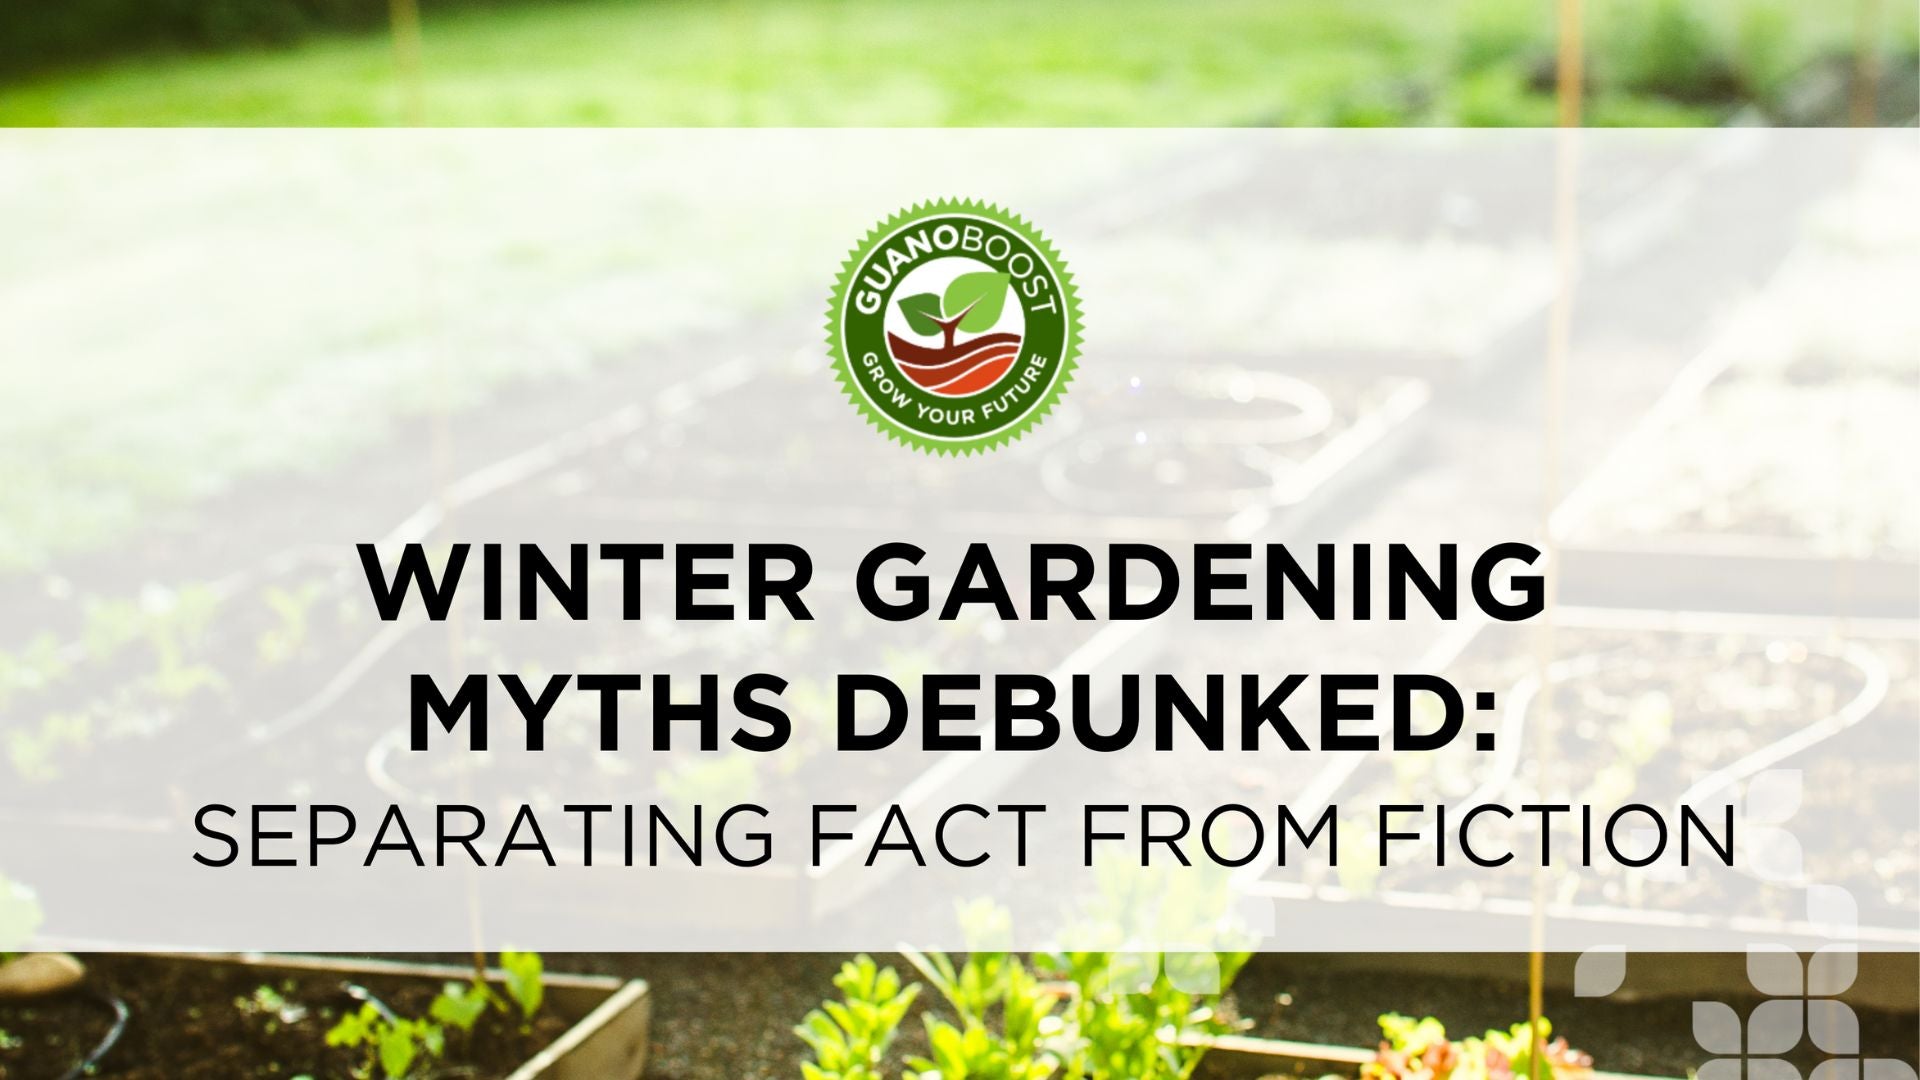 Winter Gardening Myths Debunked: Separating Fact from Fiction